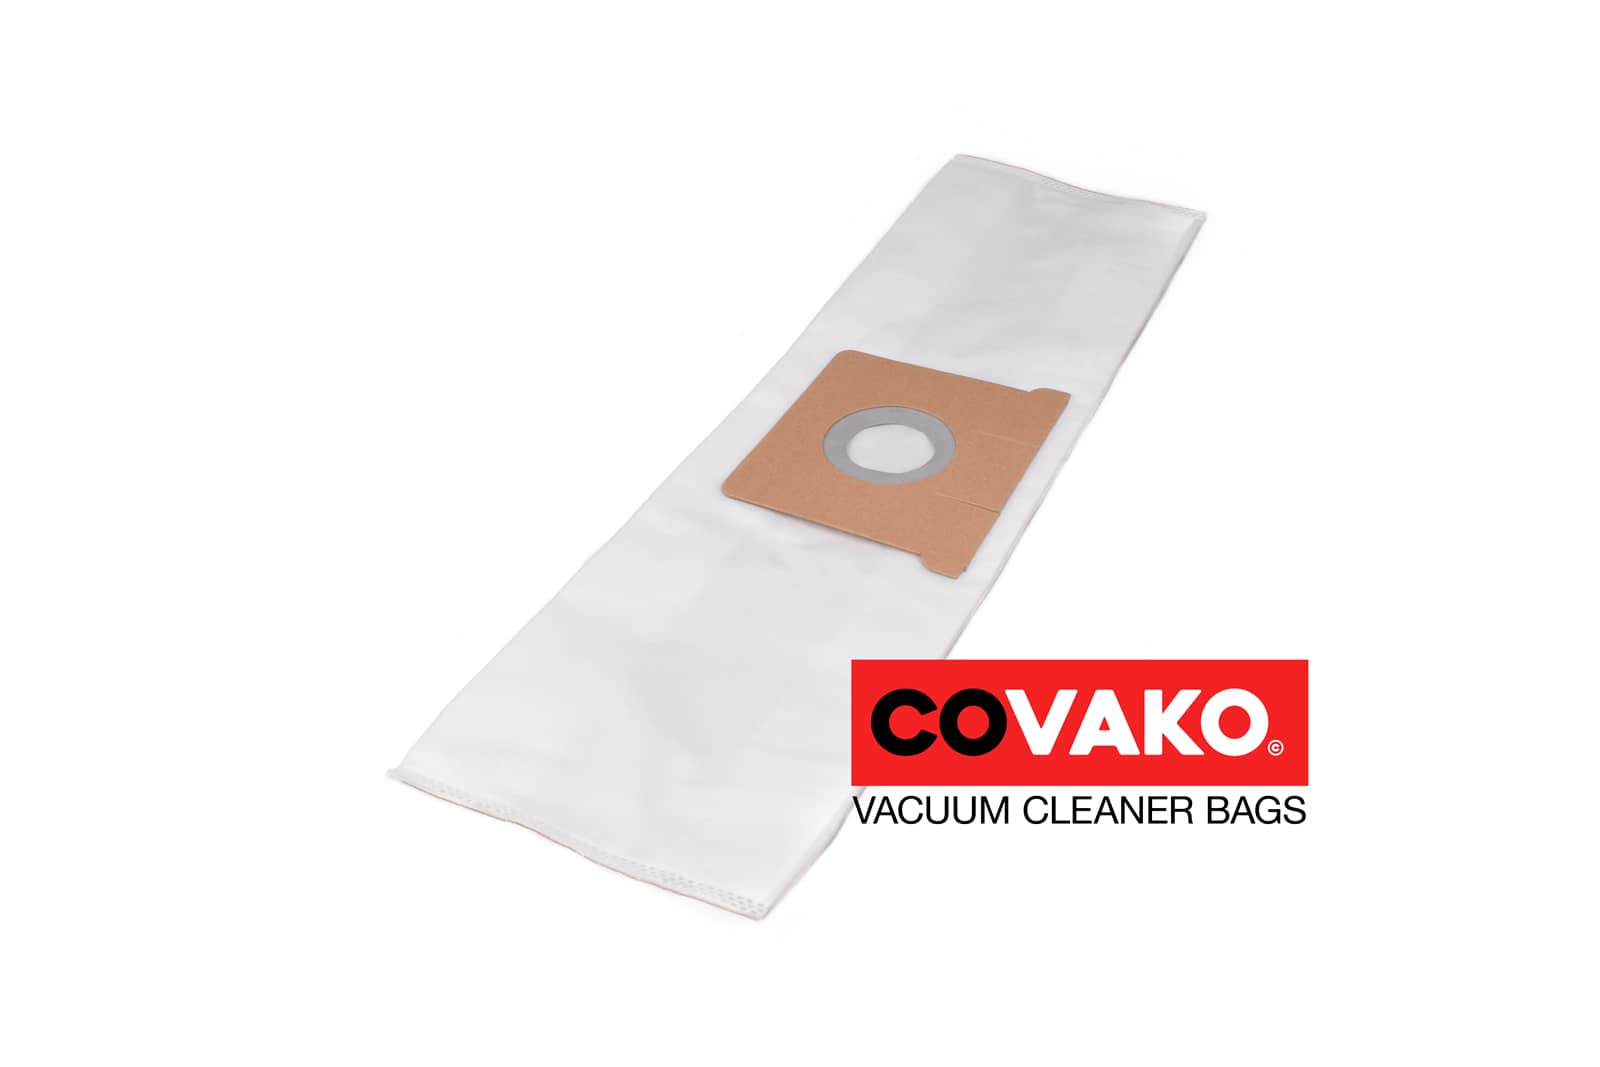 Gansow YP 1/13 ECO B / Synthesis - Gansow vacuum cleaner bags